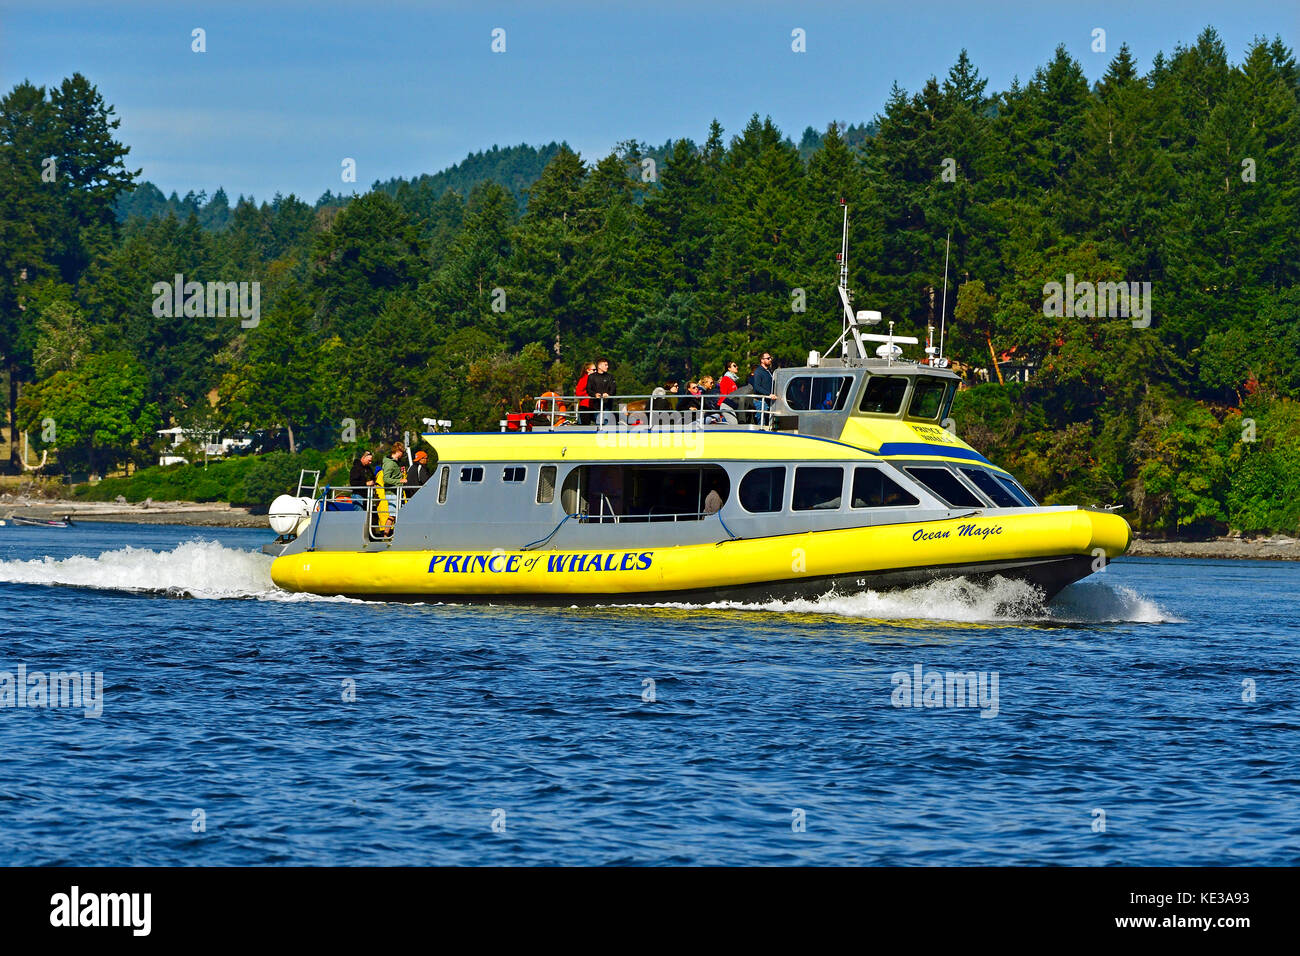 A side view of an eco tour whale watching vessel with it's load of tourists in search of a pod of killer whales that have been spotted in the bay near Vancouver Island, British Columbia Canada. Stock Photo